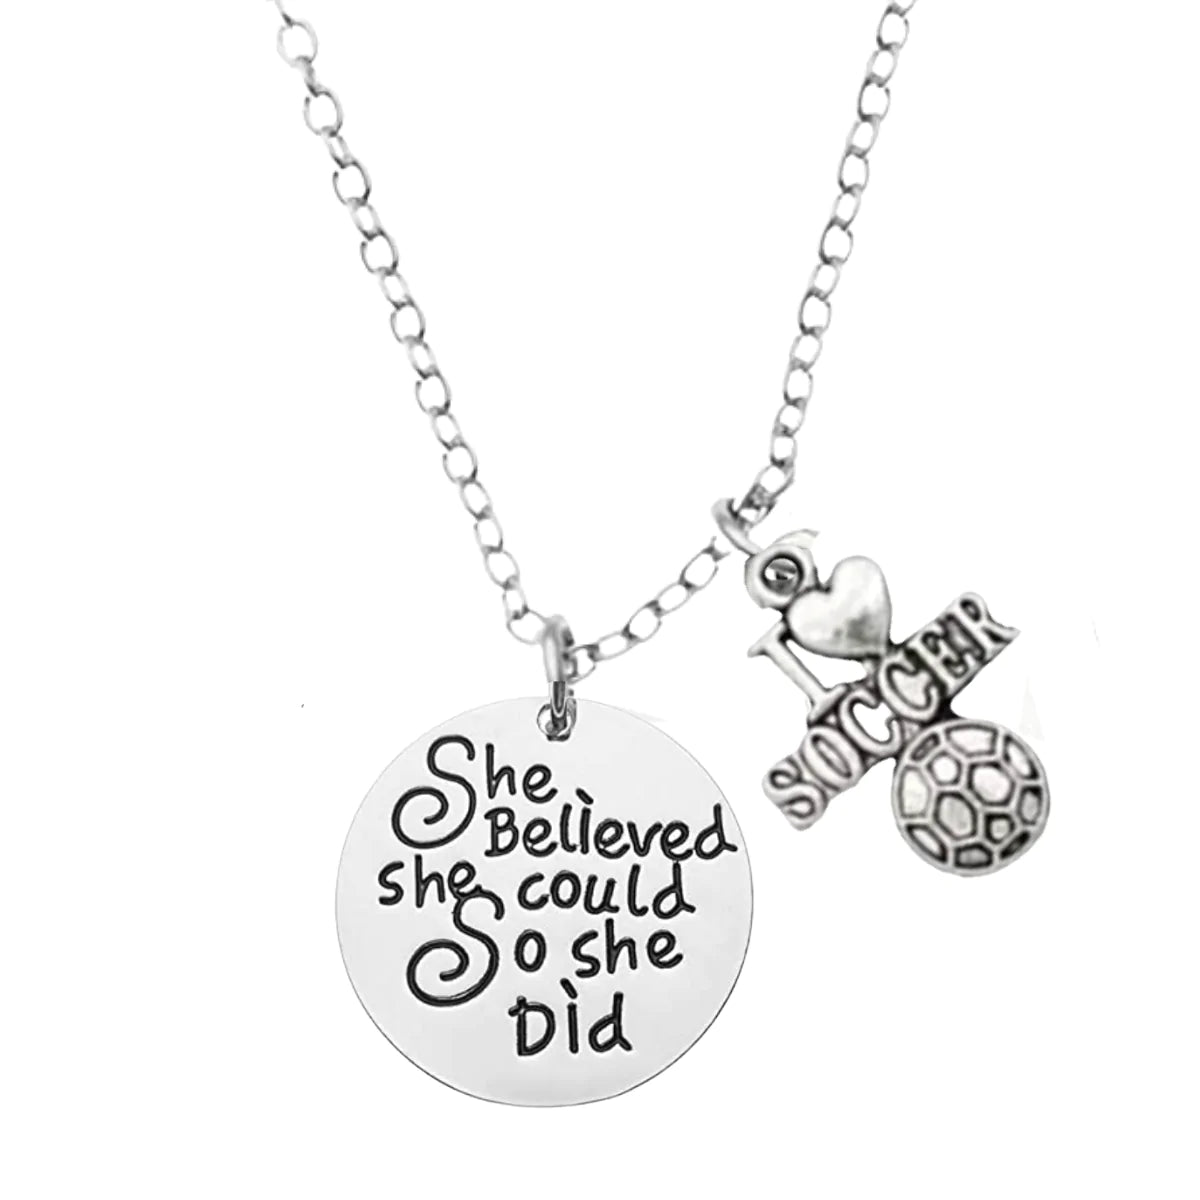 Girls Soccer She Believed She Could So She Did Necklace